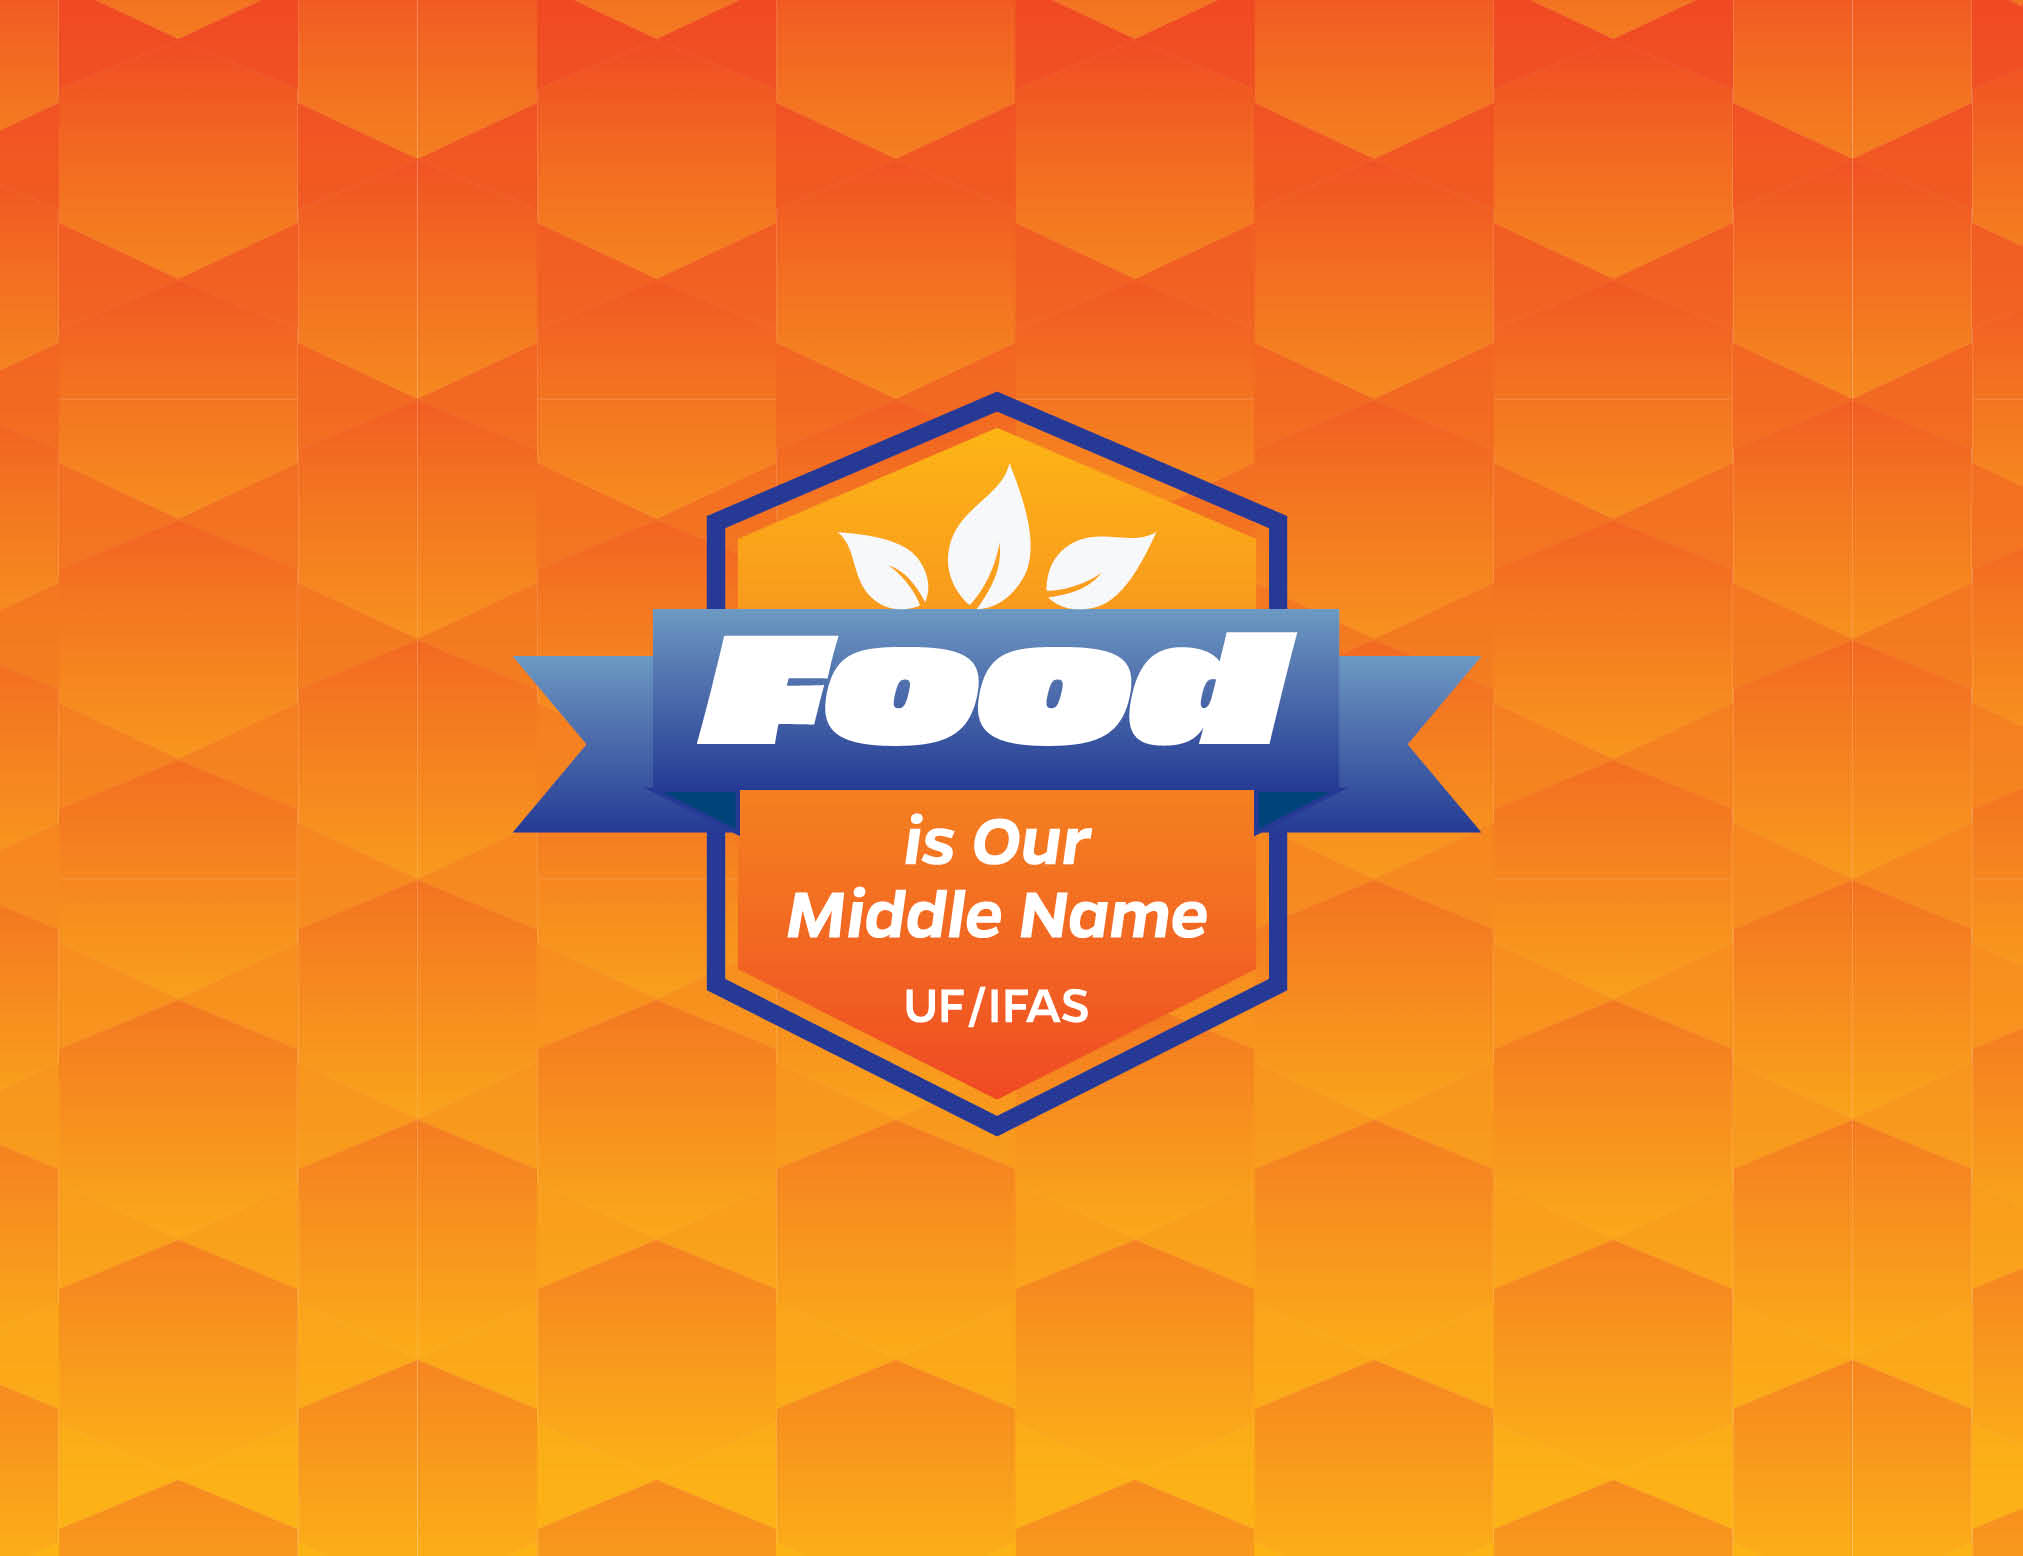 UF/IFAS 2022 Communications Toolkit Theme: Food is our Middle Name